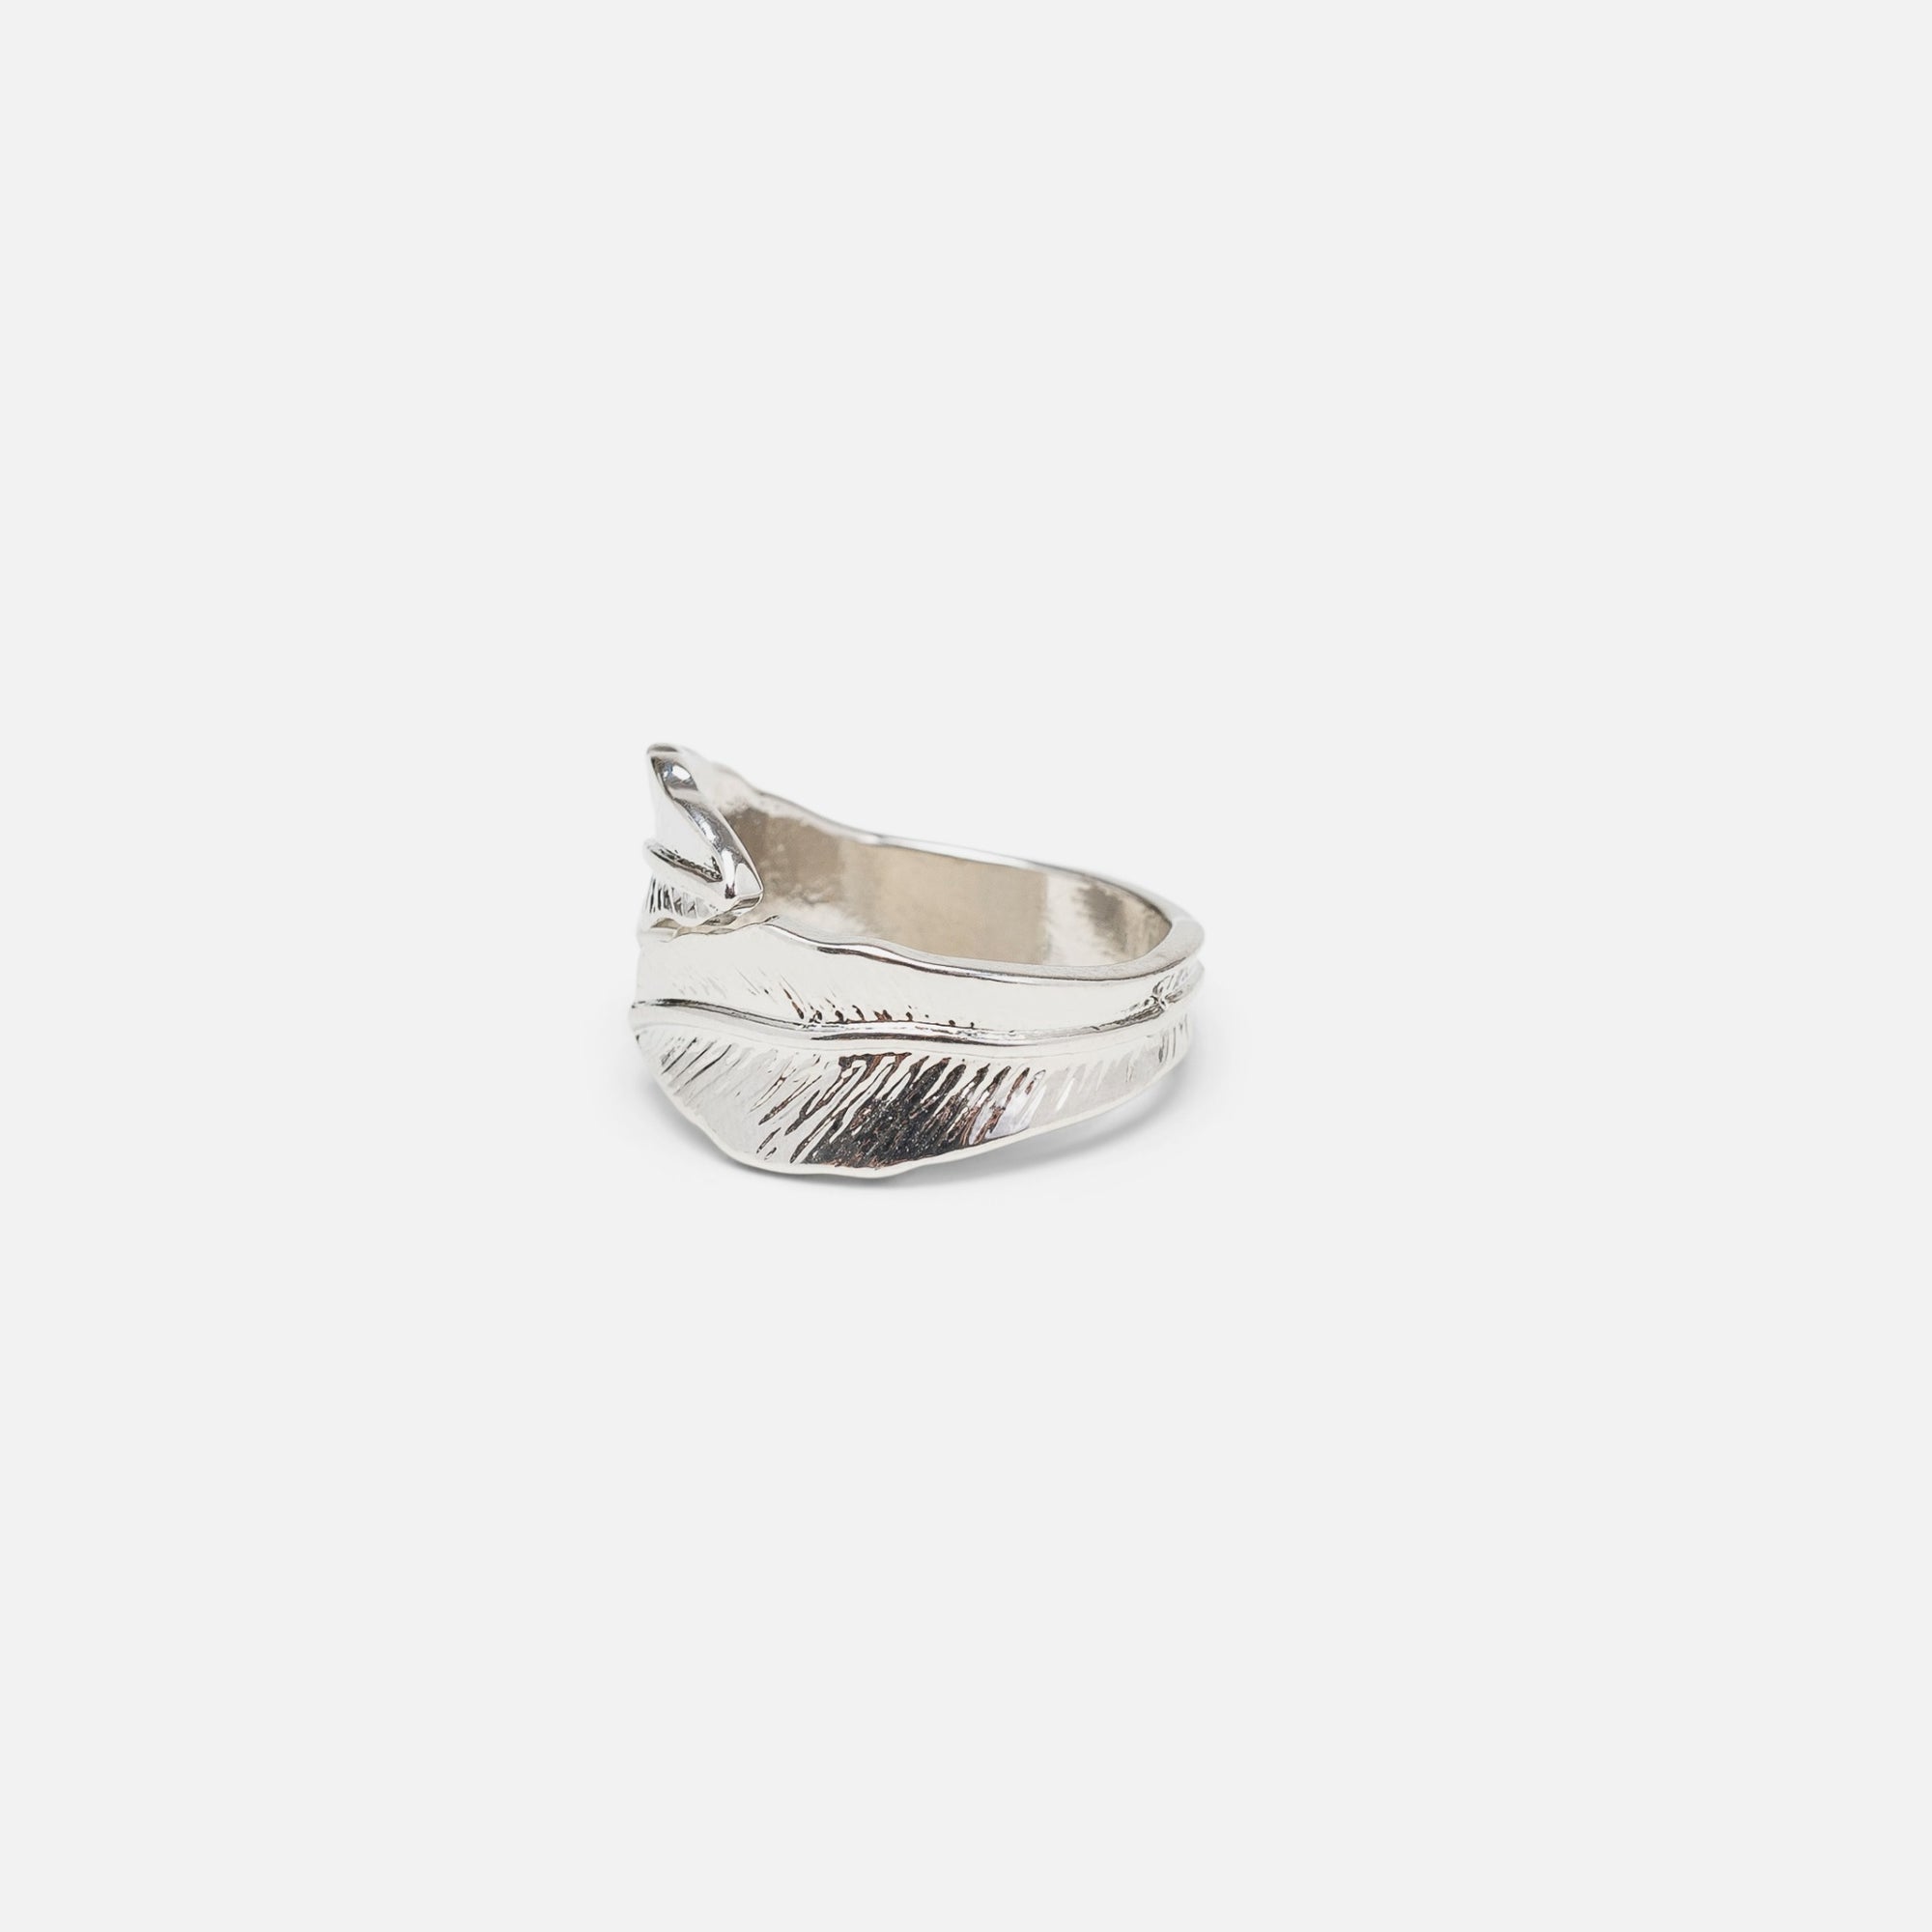 Duo of silver leaf and v shape rings